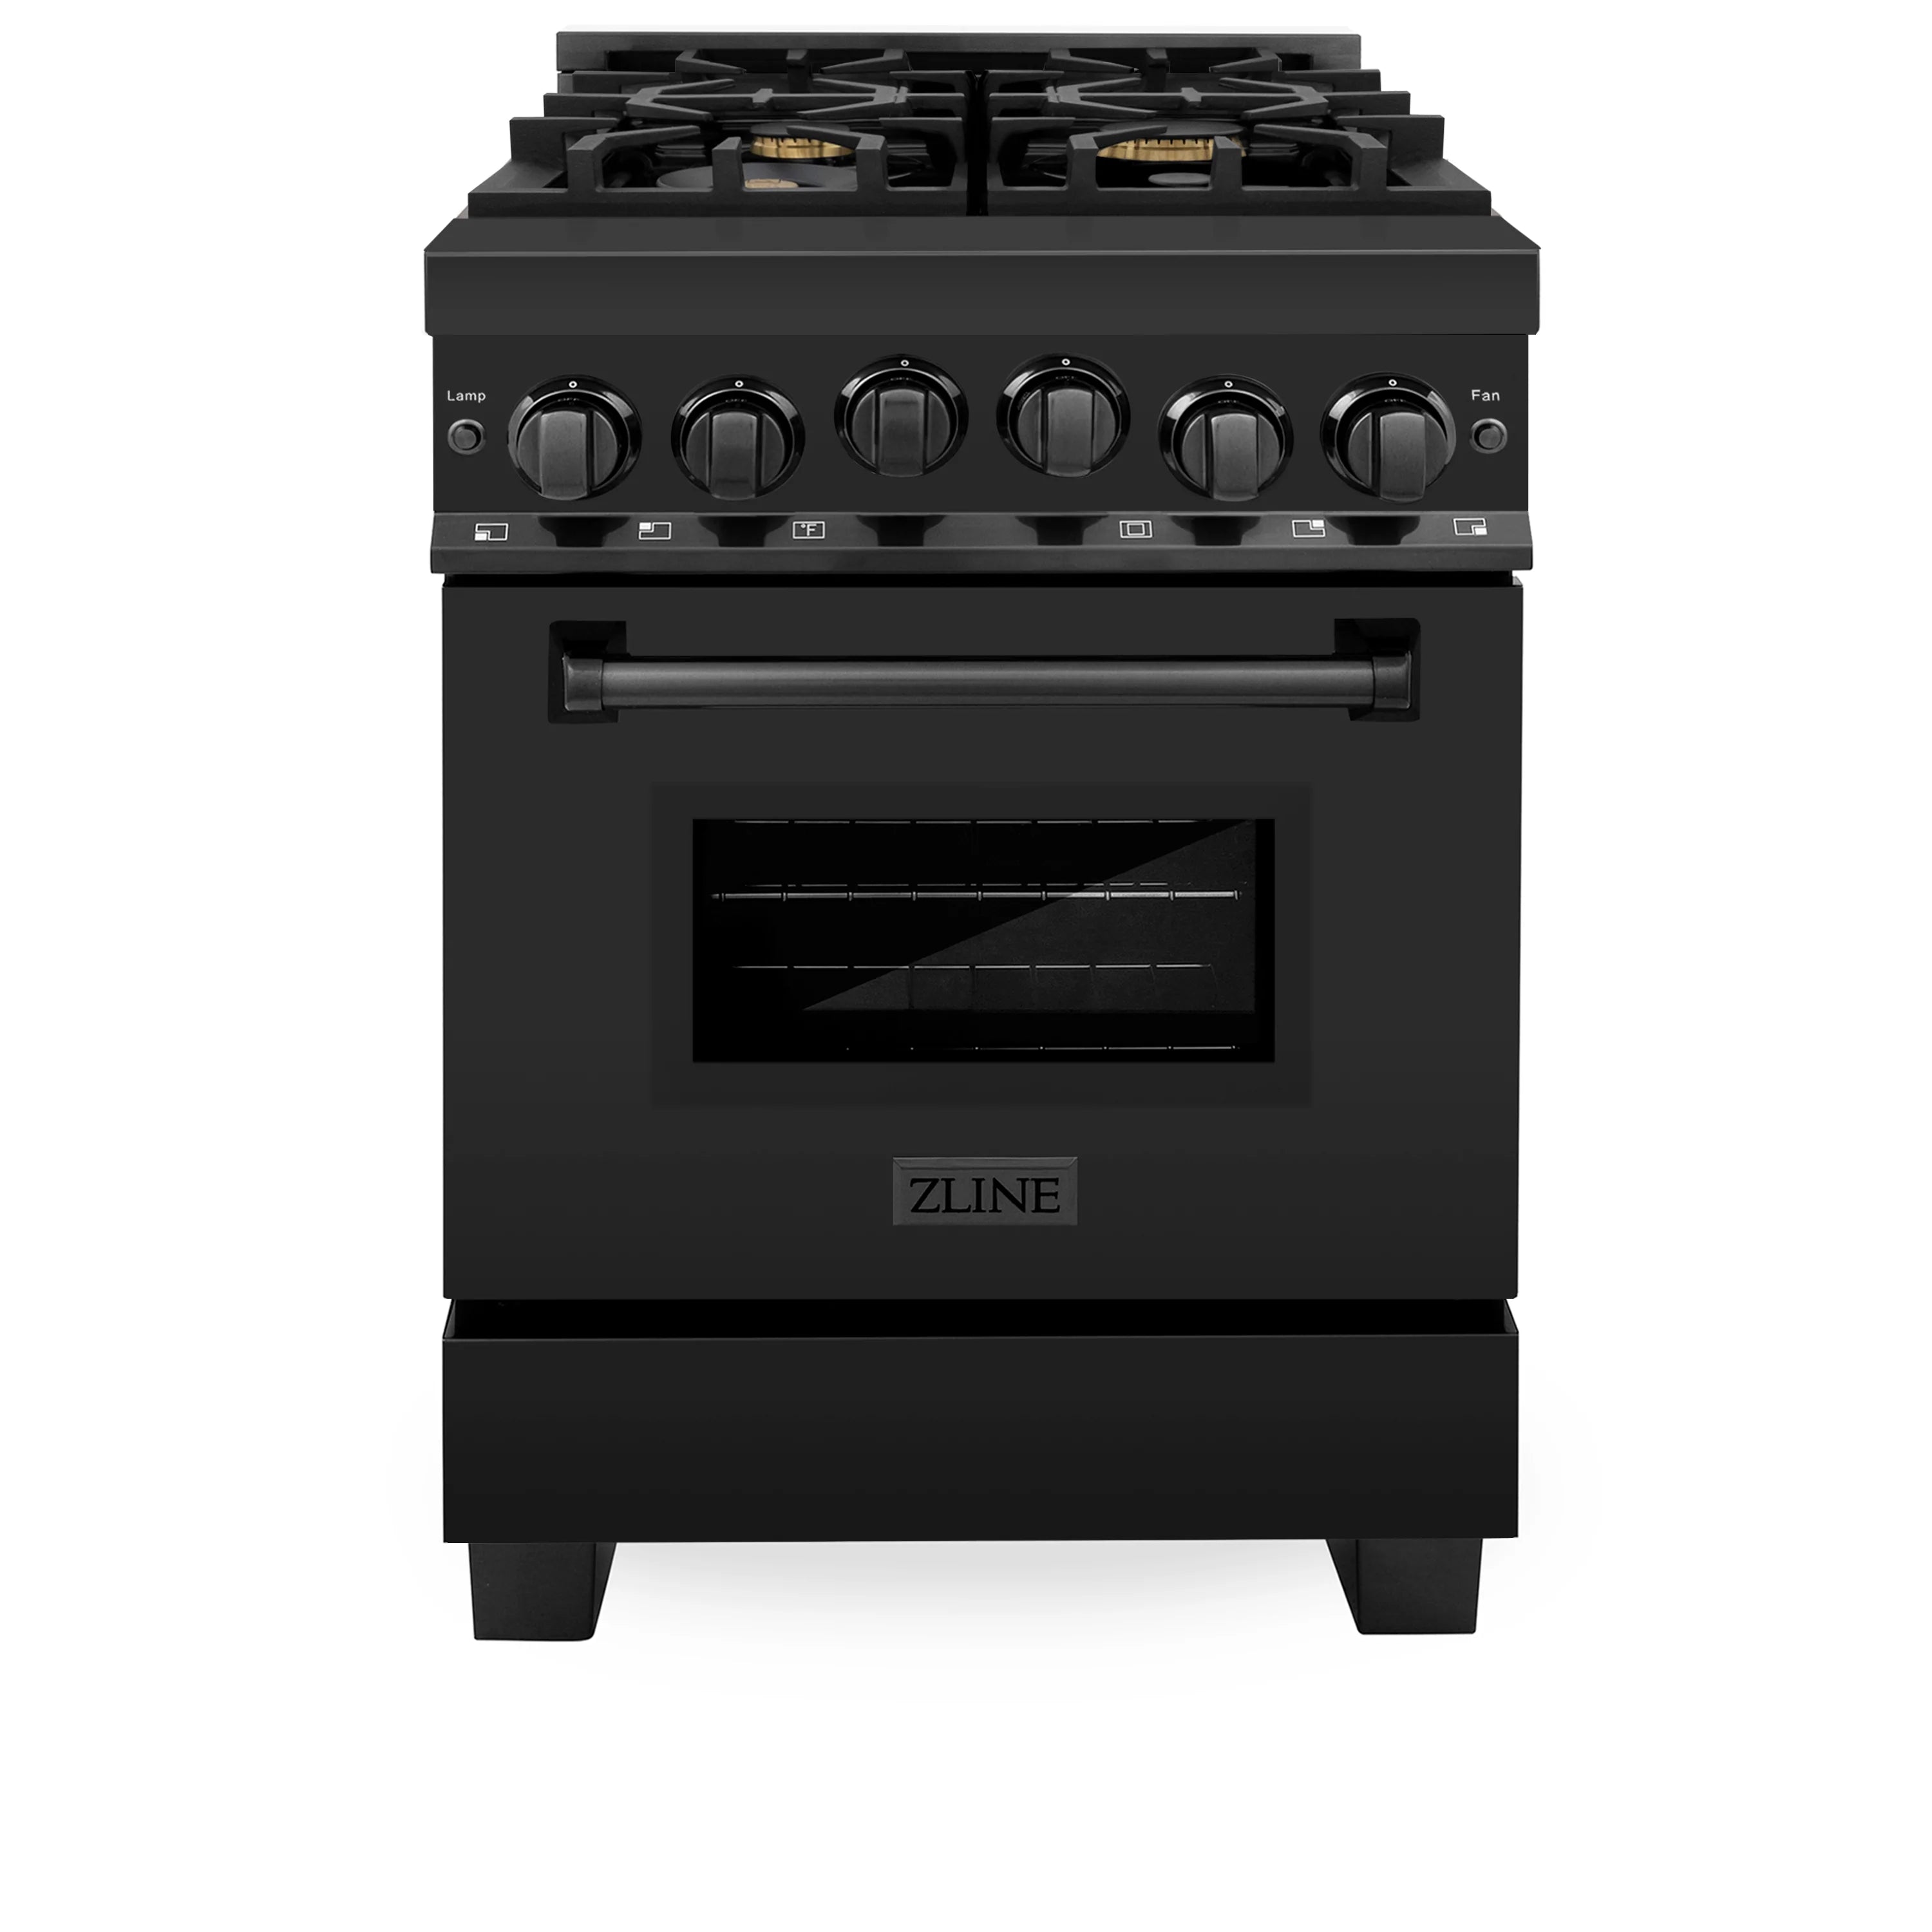 ZLINE 24" 2.8 cu. ft. Range with Gas Stove and Gas Oven in Black Stainless Steel (RGB-24)